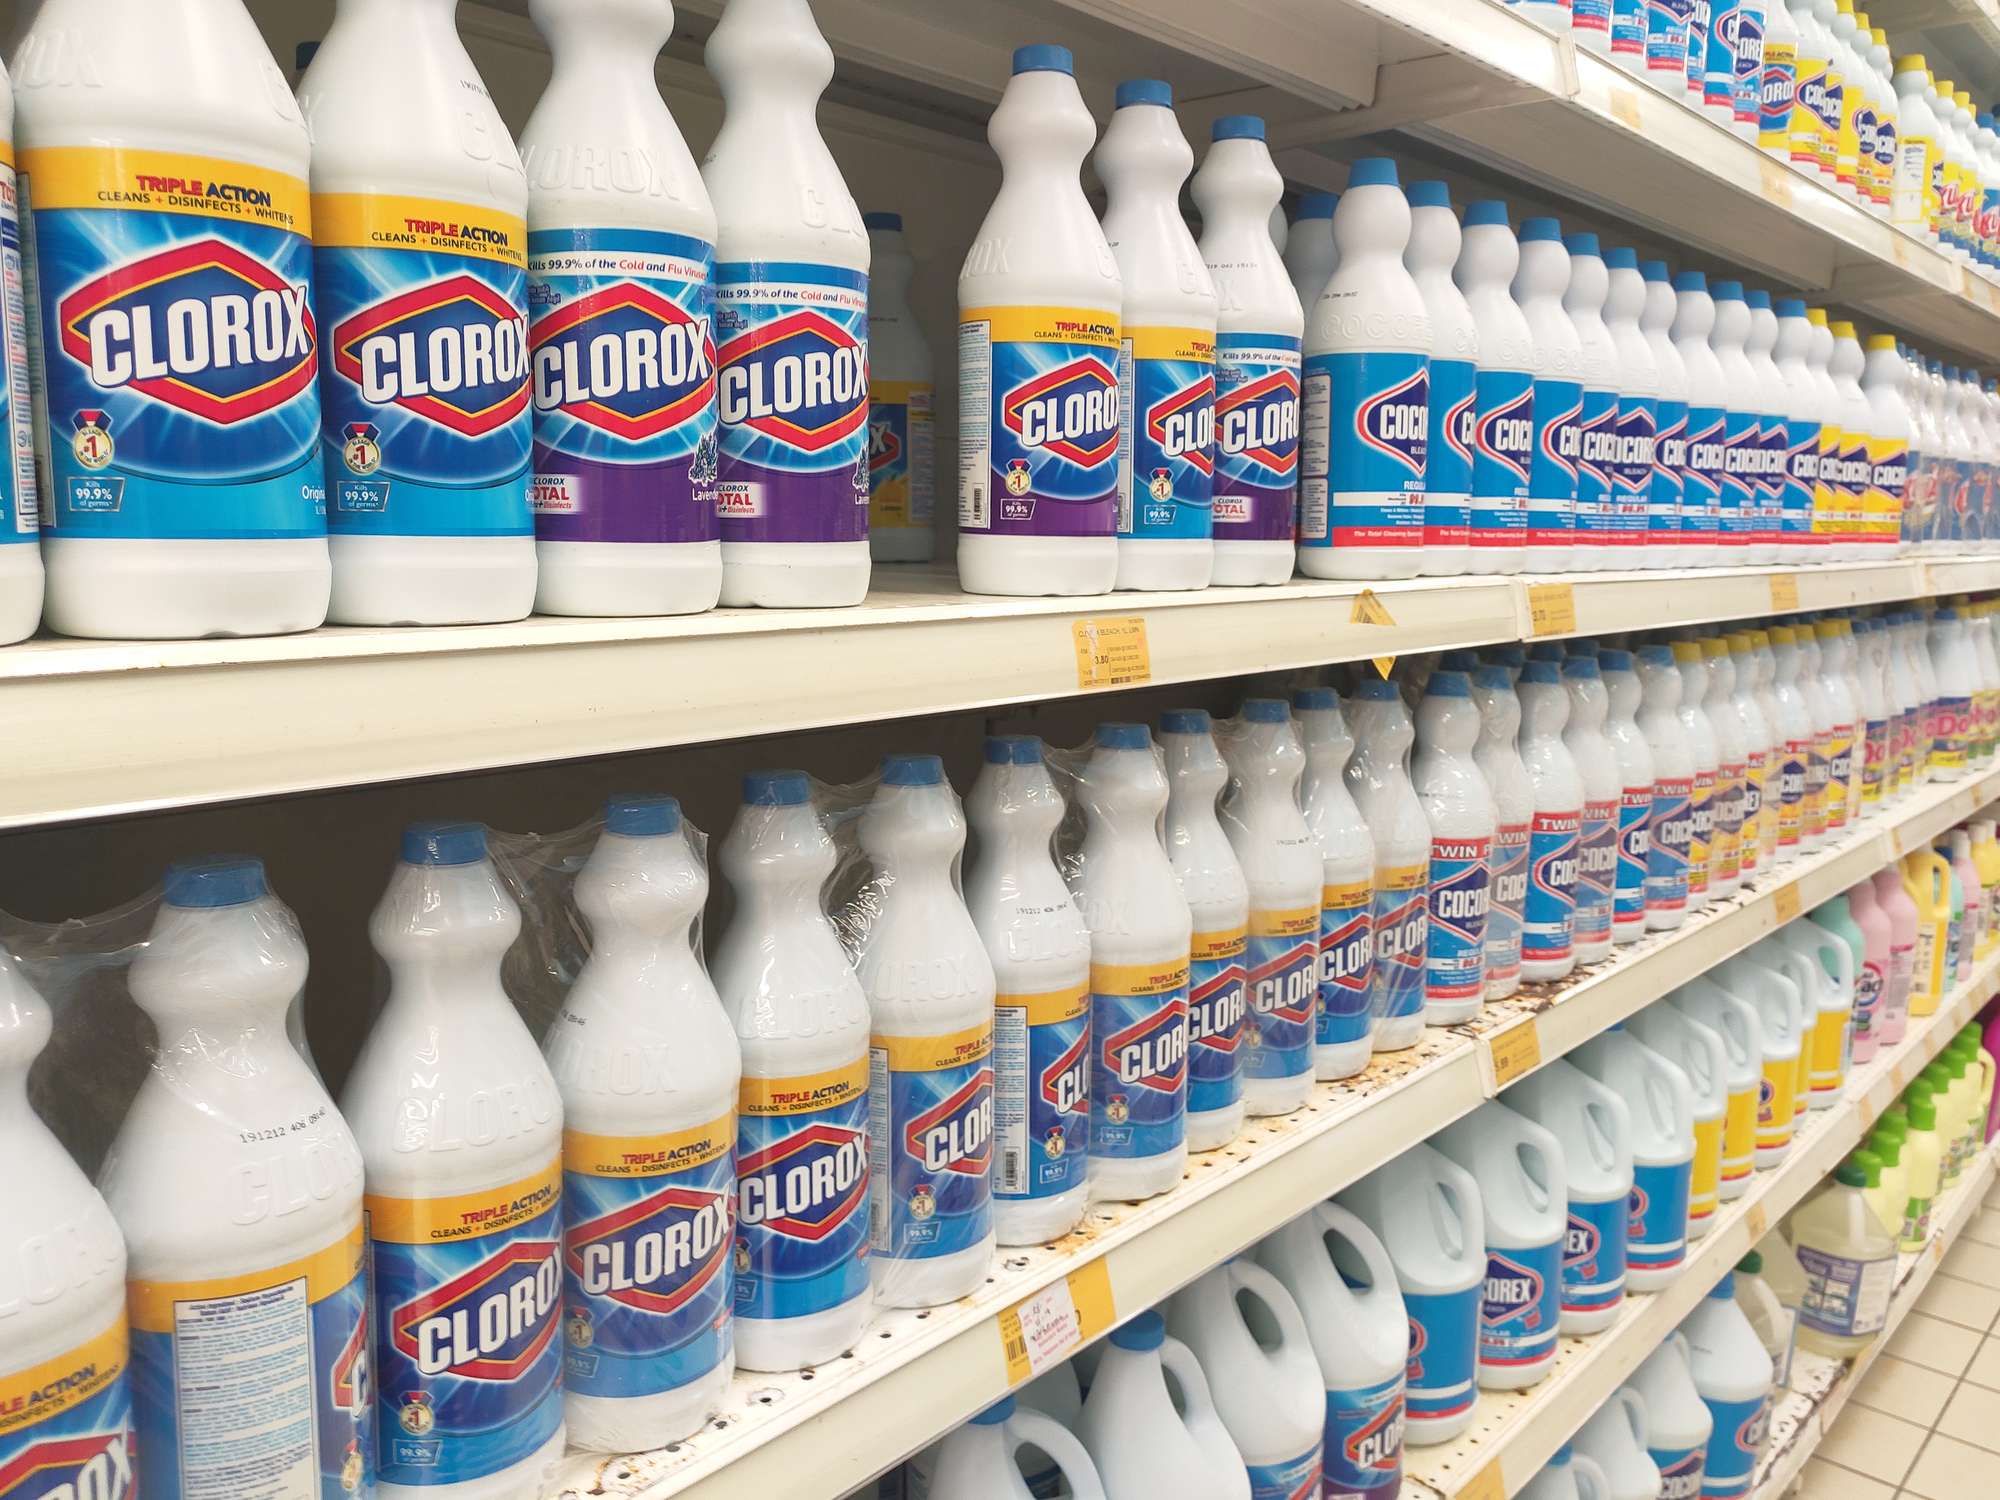 Clorox products on shelves